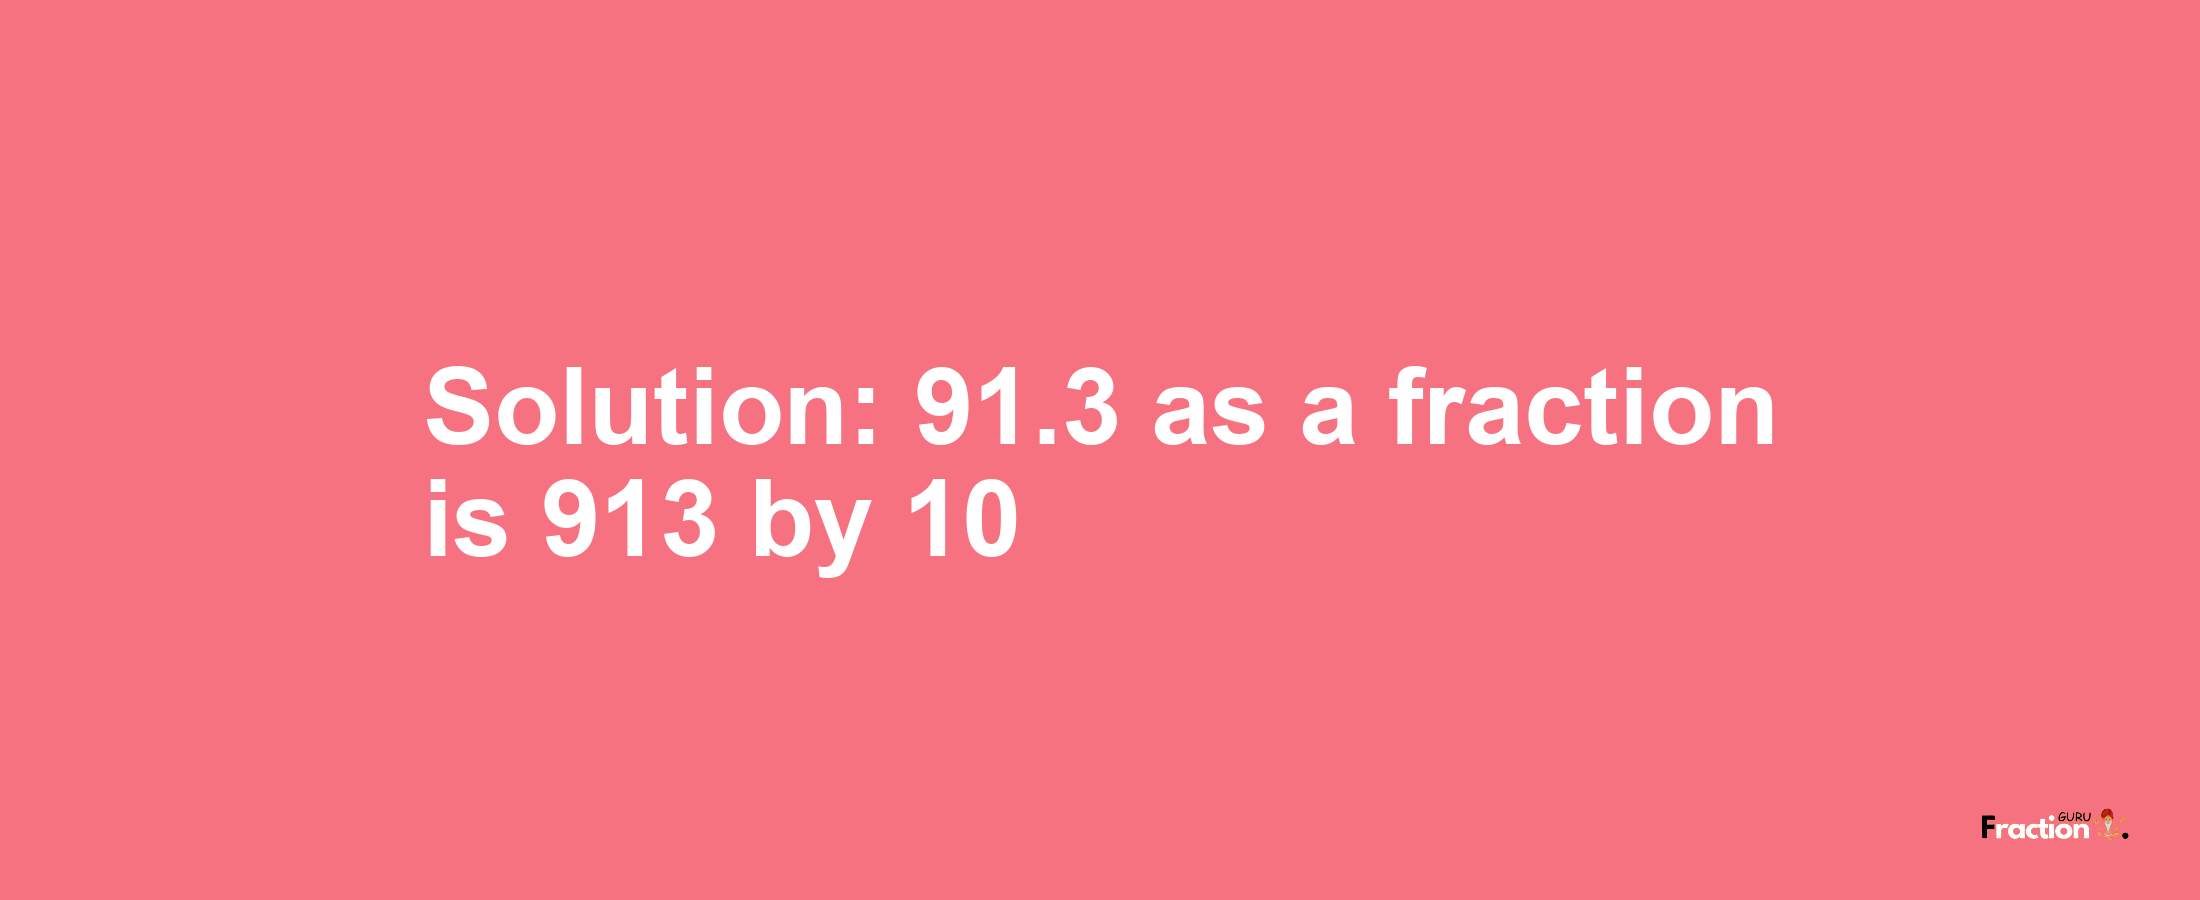 Solution:91.3 as a fraction is 913/10